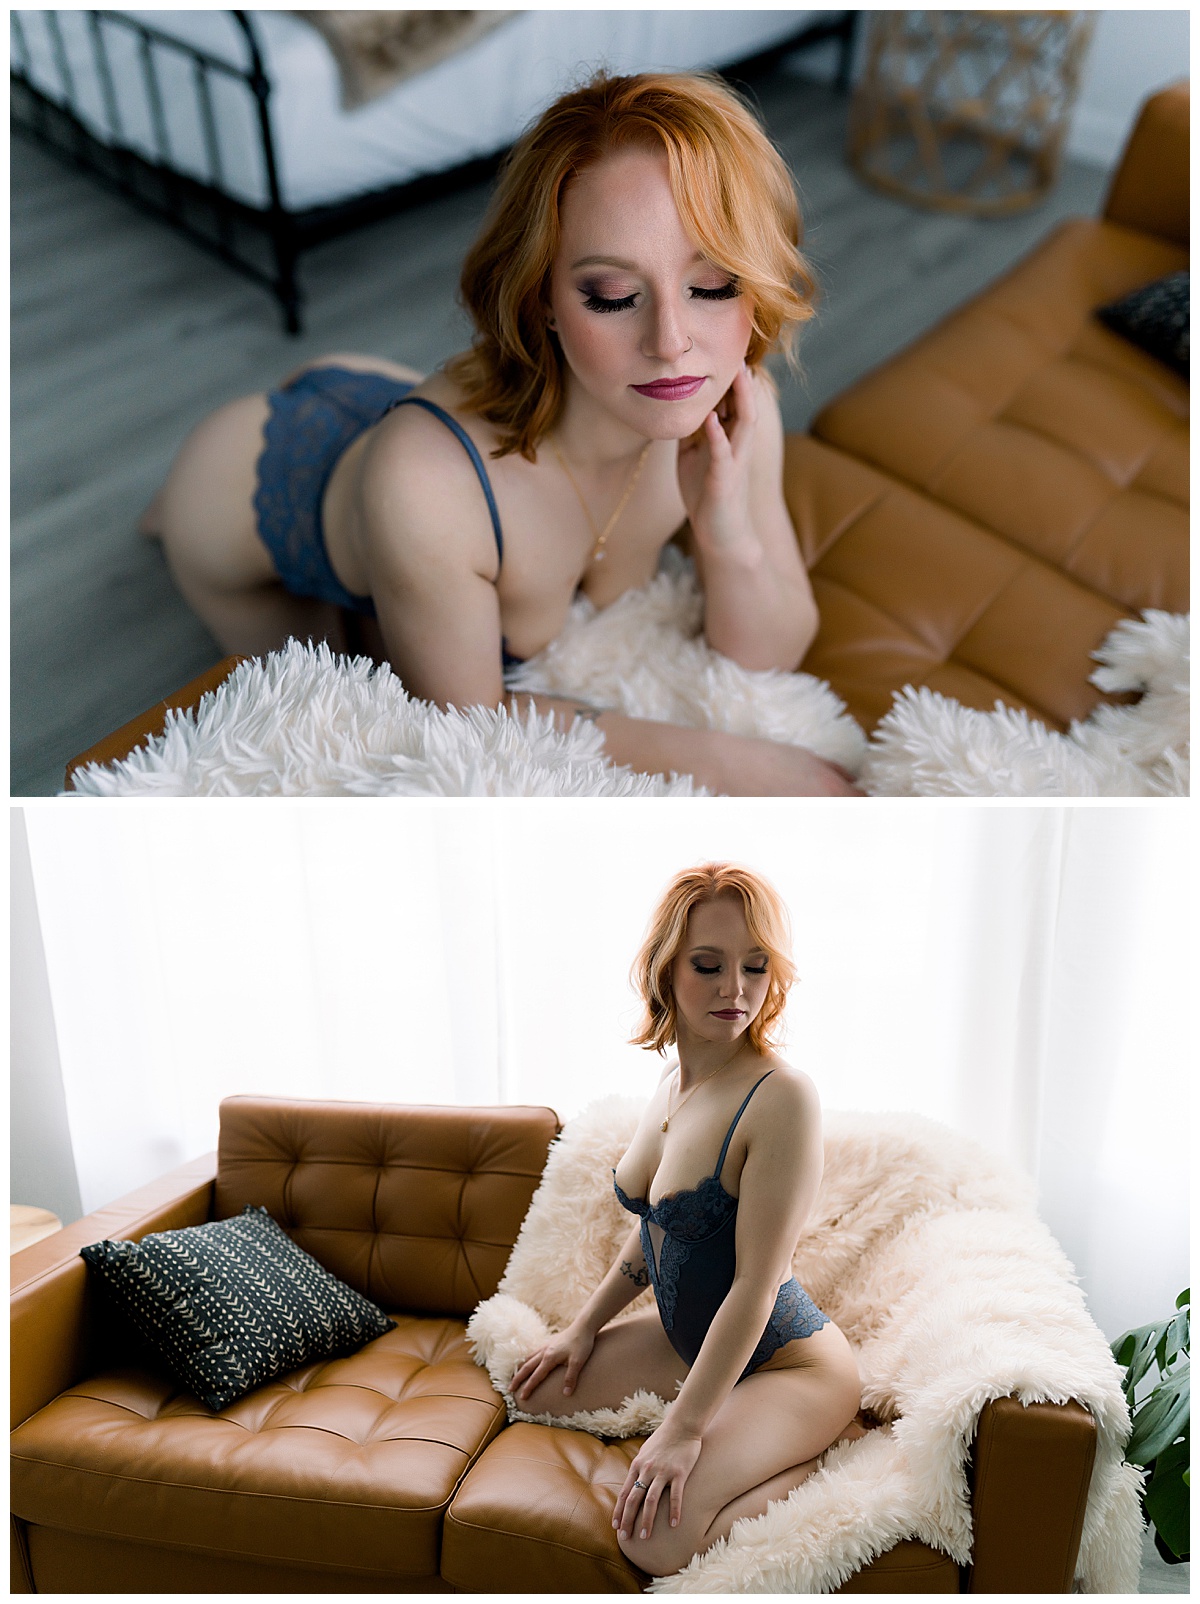 Woman sits on couch in blue lingerie for Sioux Falls Boudoir Photographer